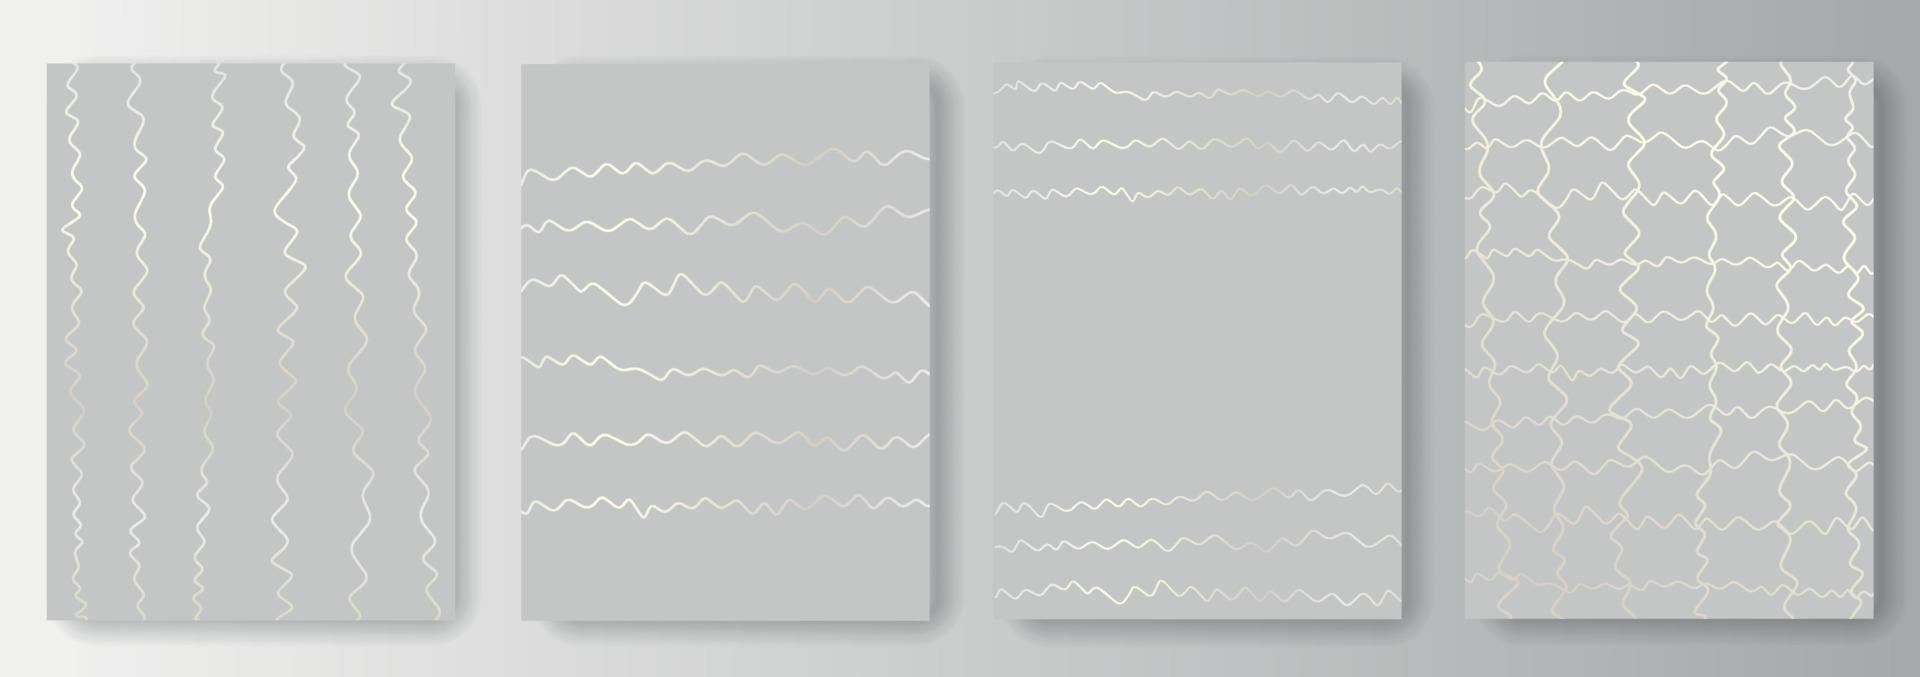 Collection of gray backgrounds with silver wavy lines vector